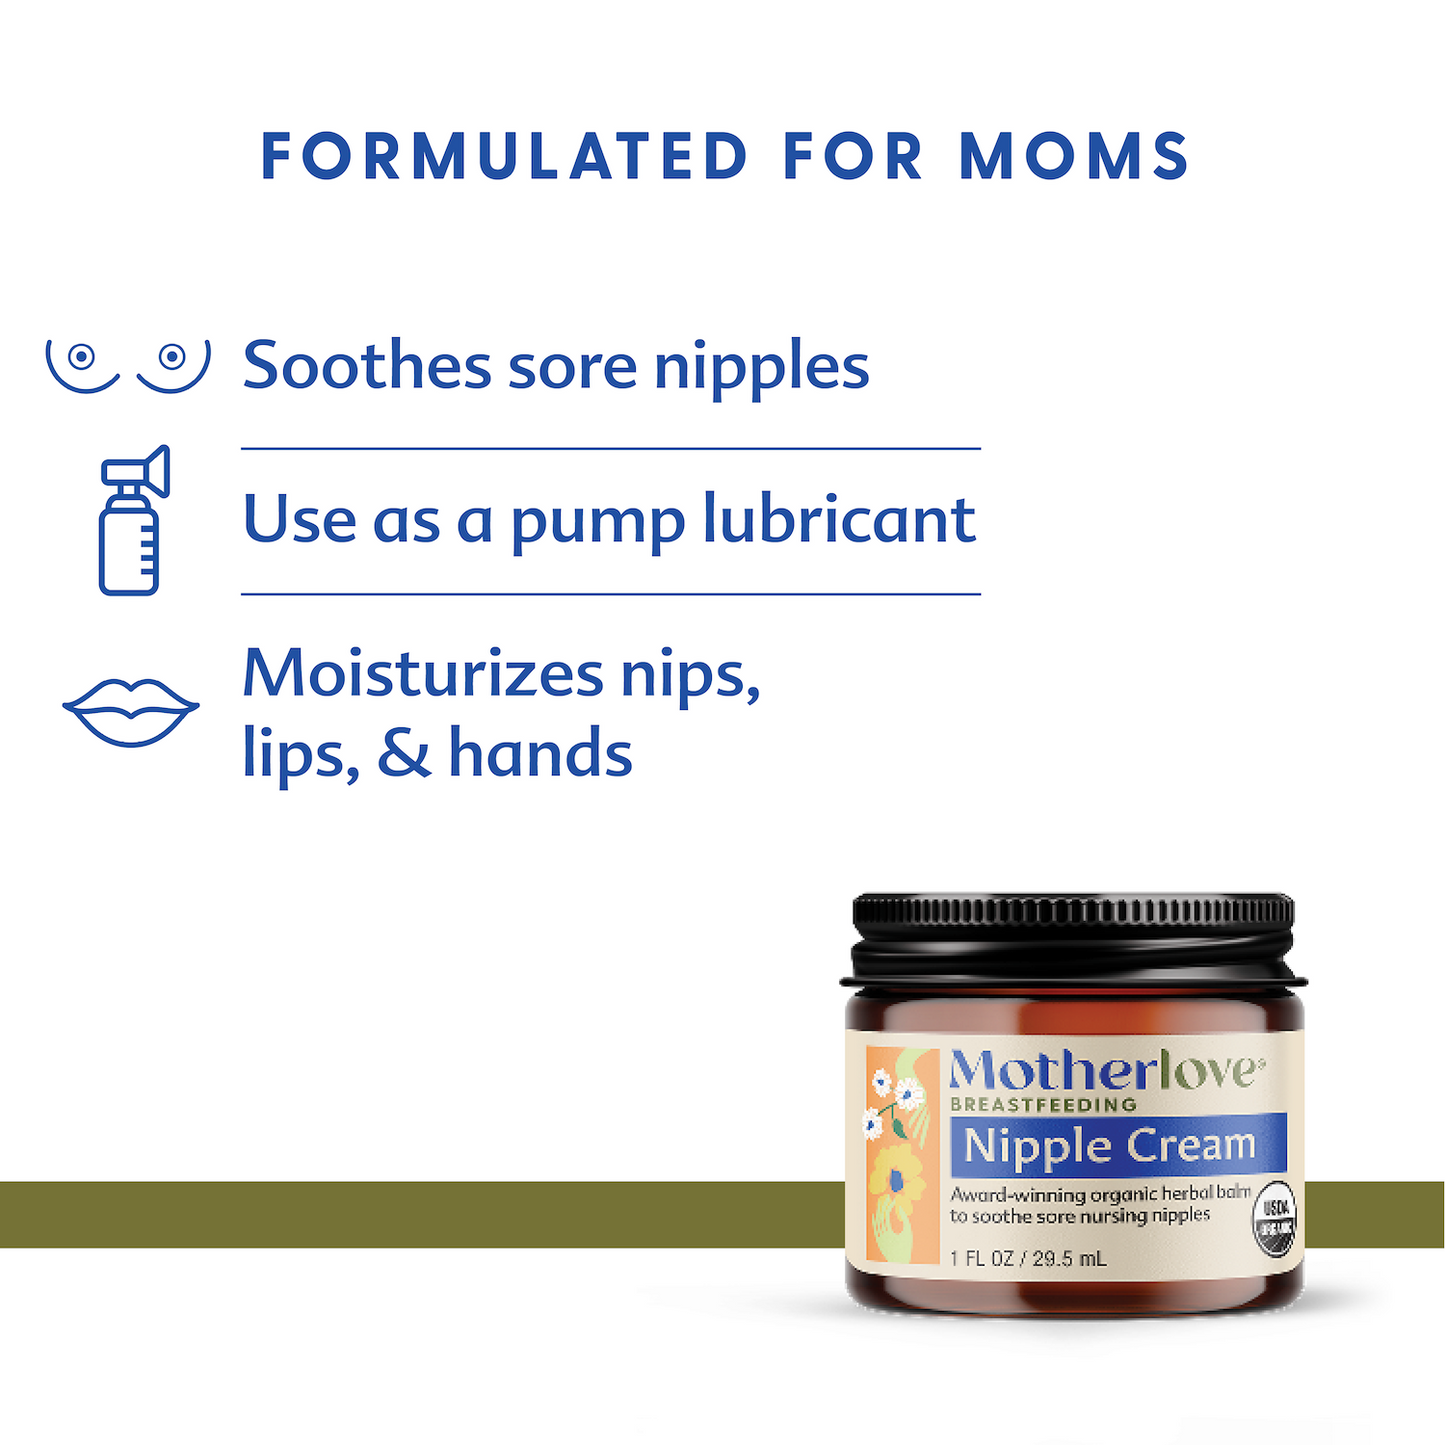 picture of a jar of motherlove nipple cream and how it is formulated for moms, soothes sore nipples, use as a pump lubricant, moisturizes nips, lips, and hands